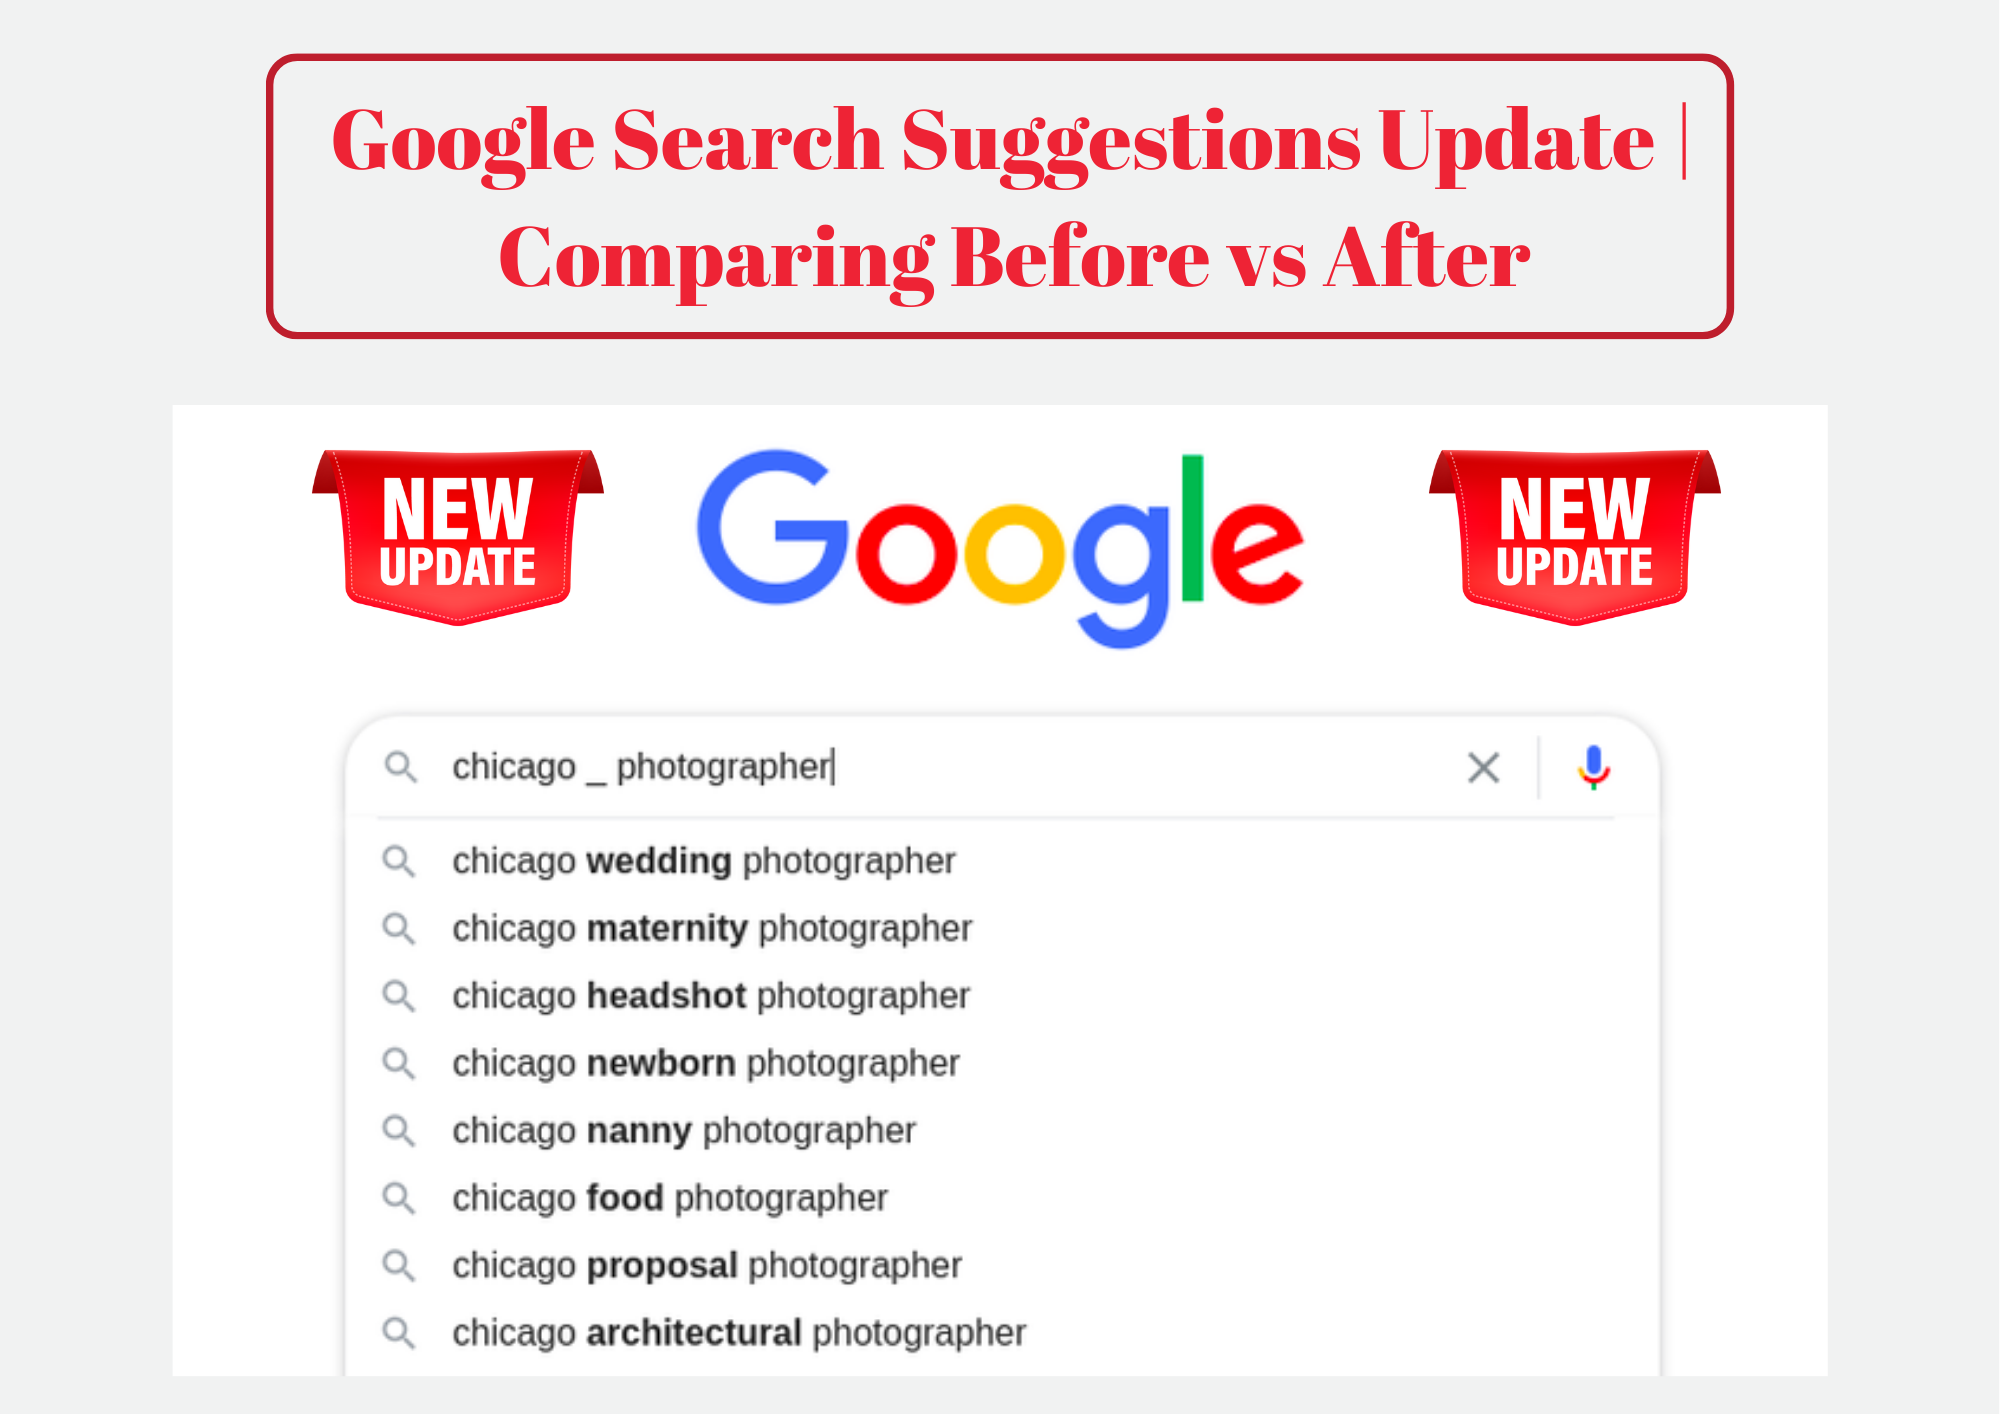 Google Search Suggestions Update Comparing Before vs After